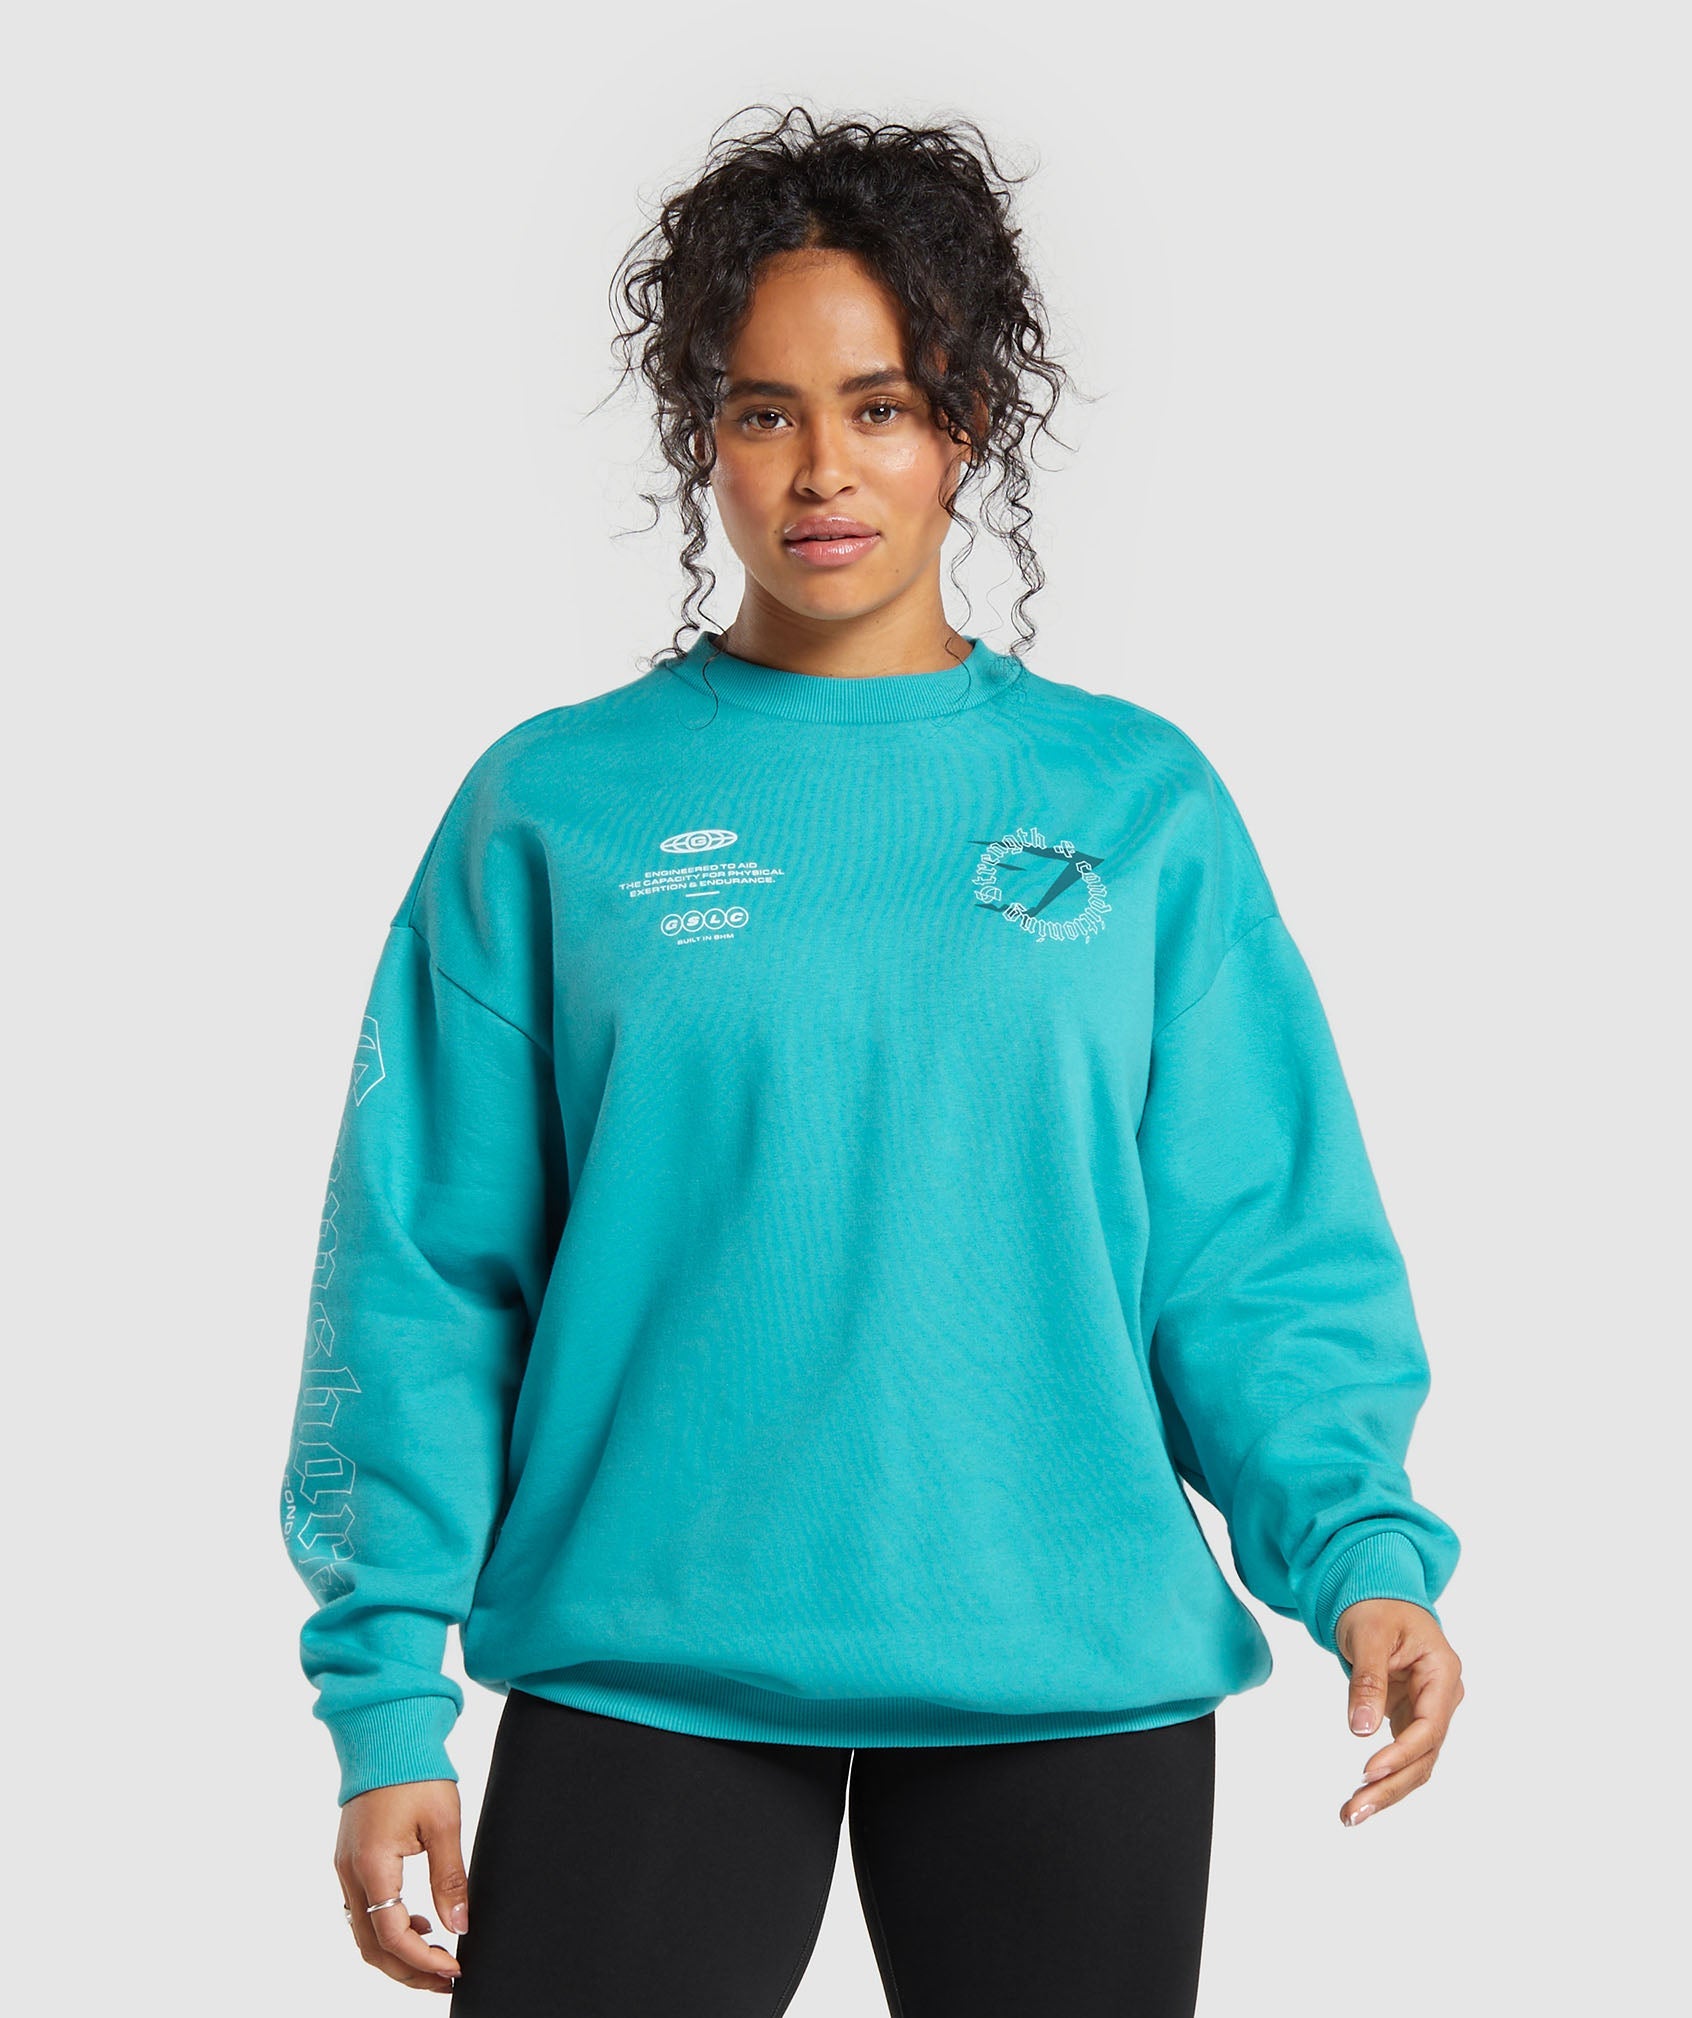 Strength & Conditioning Oversized Sweatshirt in Artificial Teal